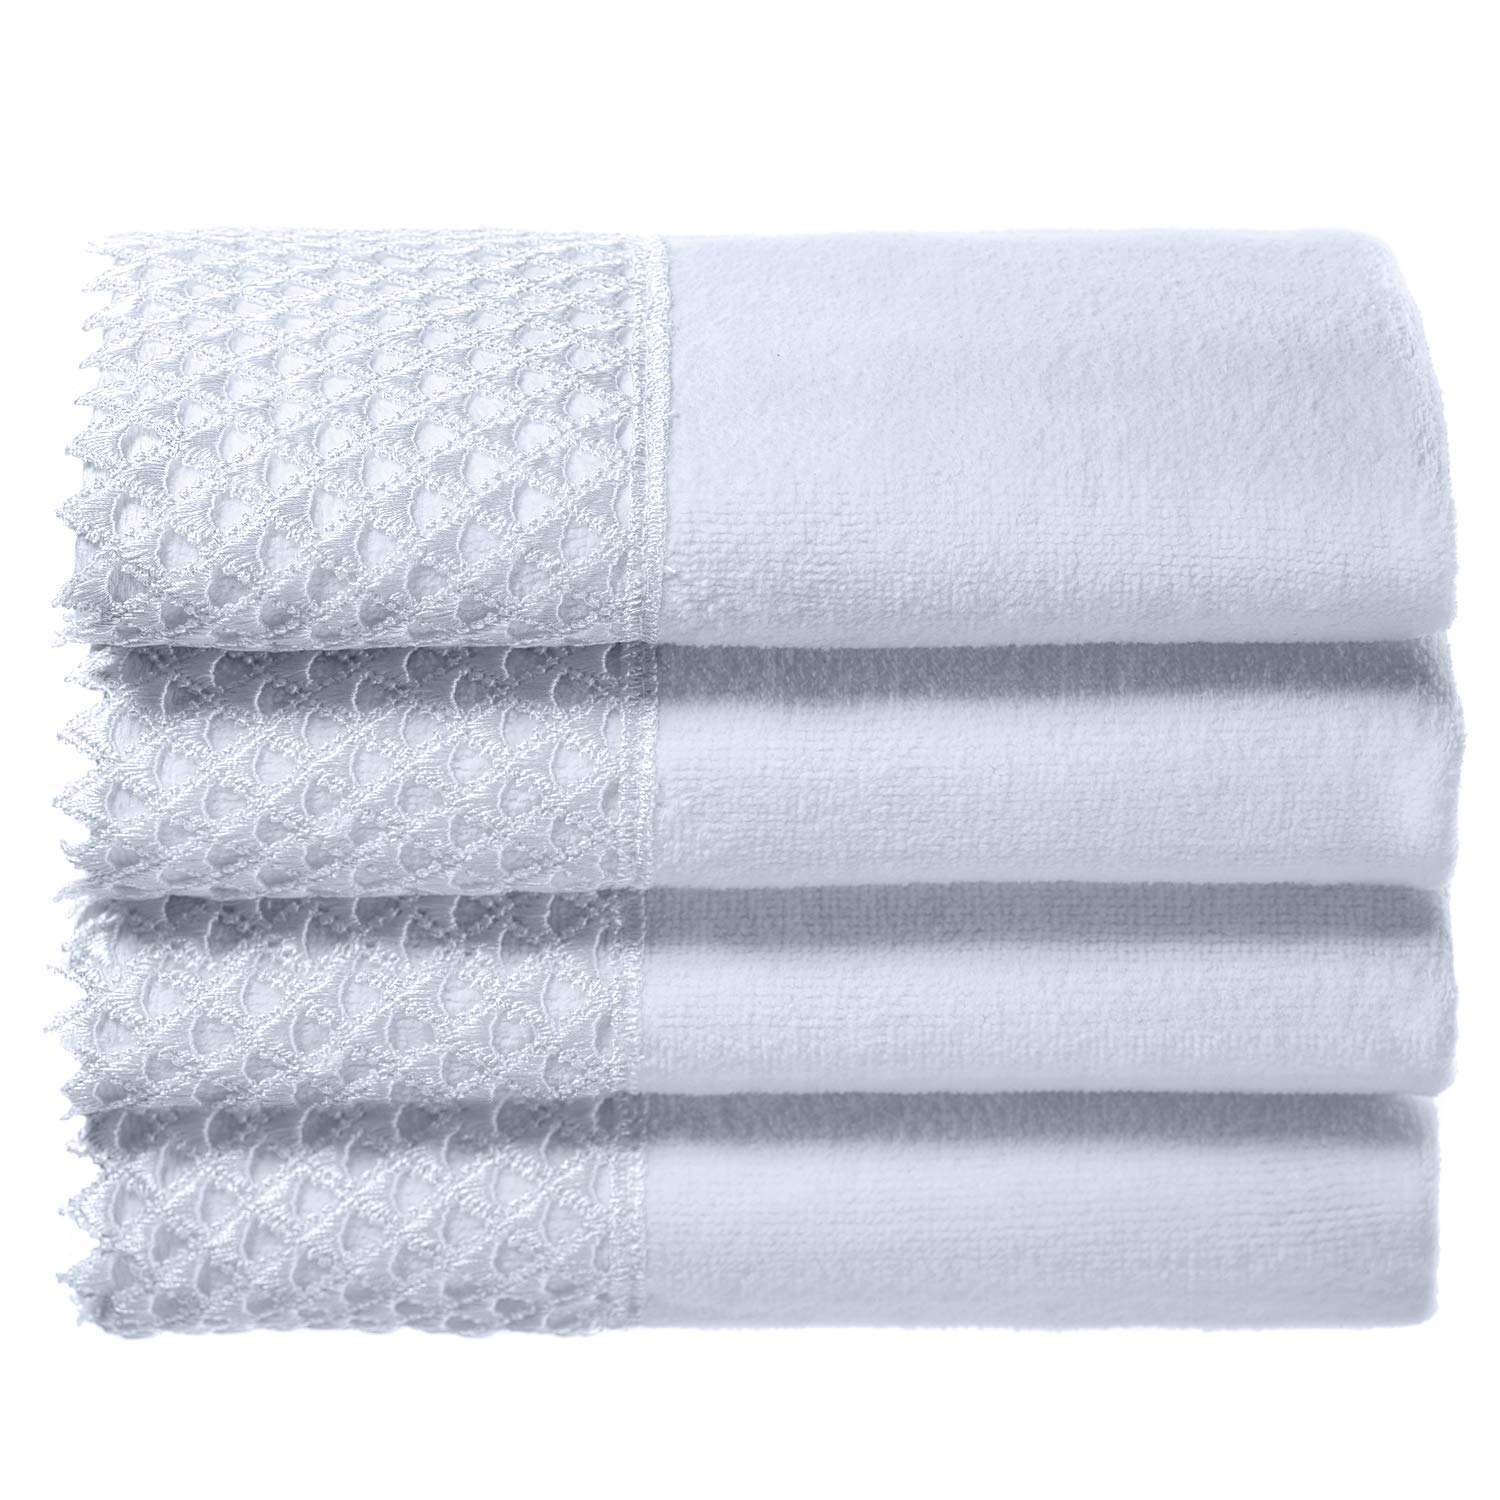 Creative Scents Decorative Fingertip Embellished White Gorgeous Lace Towels for Bathroom and Powder Room - 4 Pack 11 by 18" Cotton Velour Towel Set Packaged in Gift Box for Best Gift (White)  - Like New